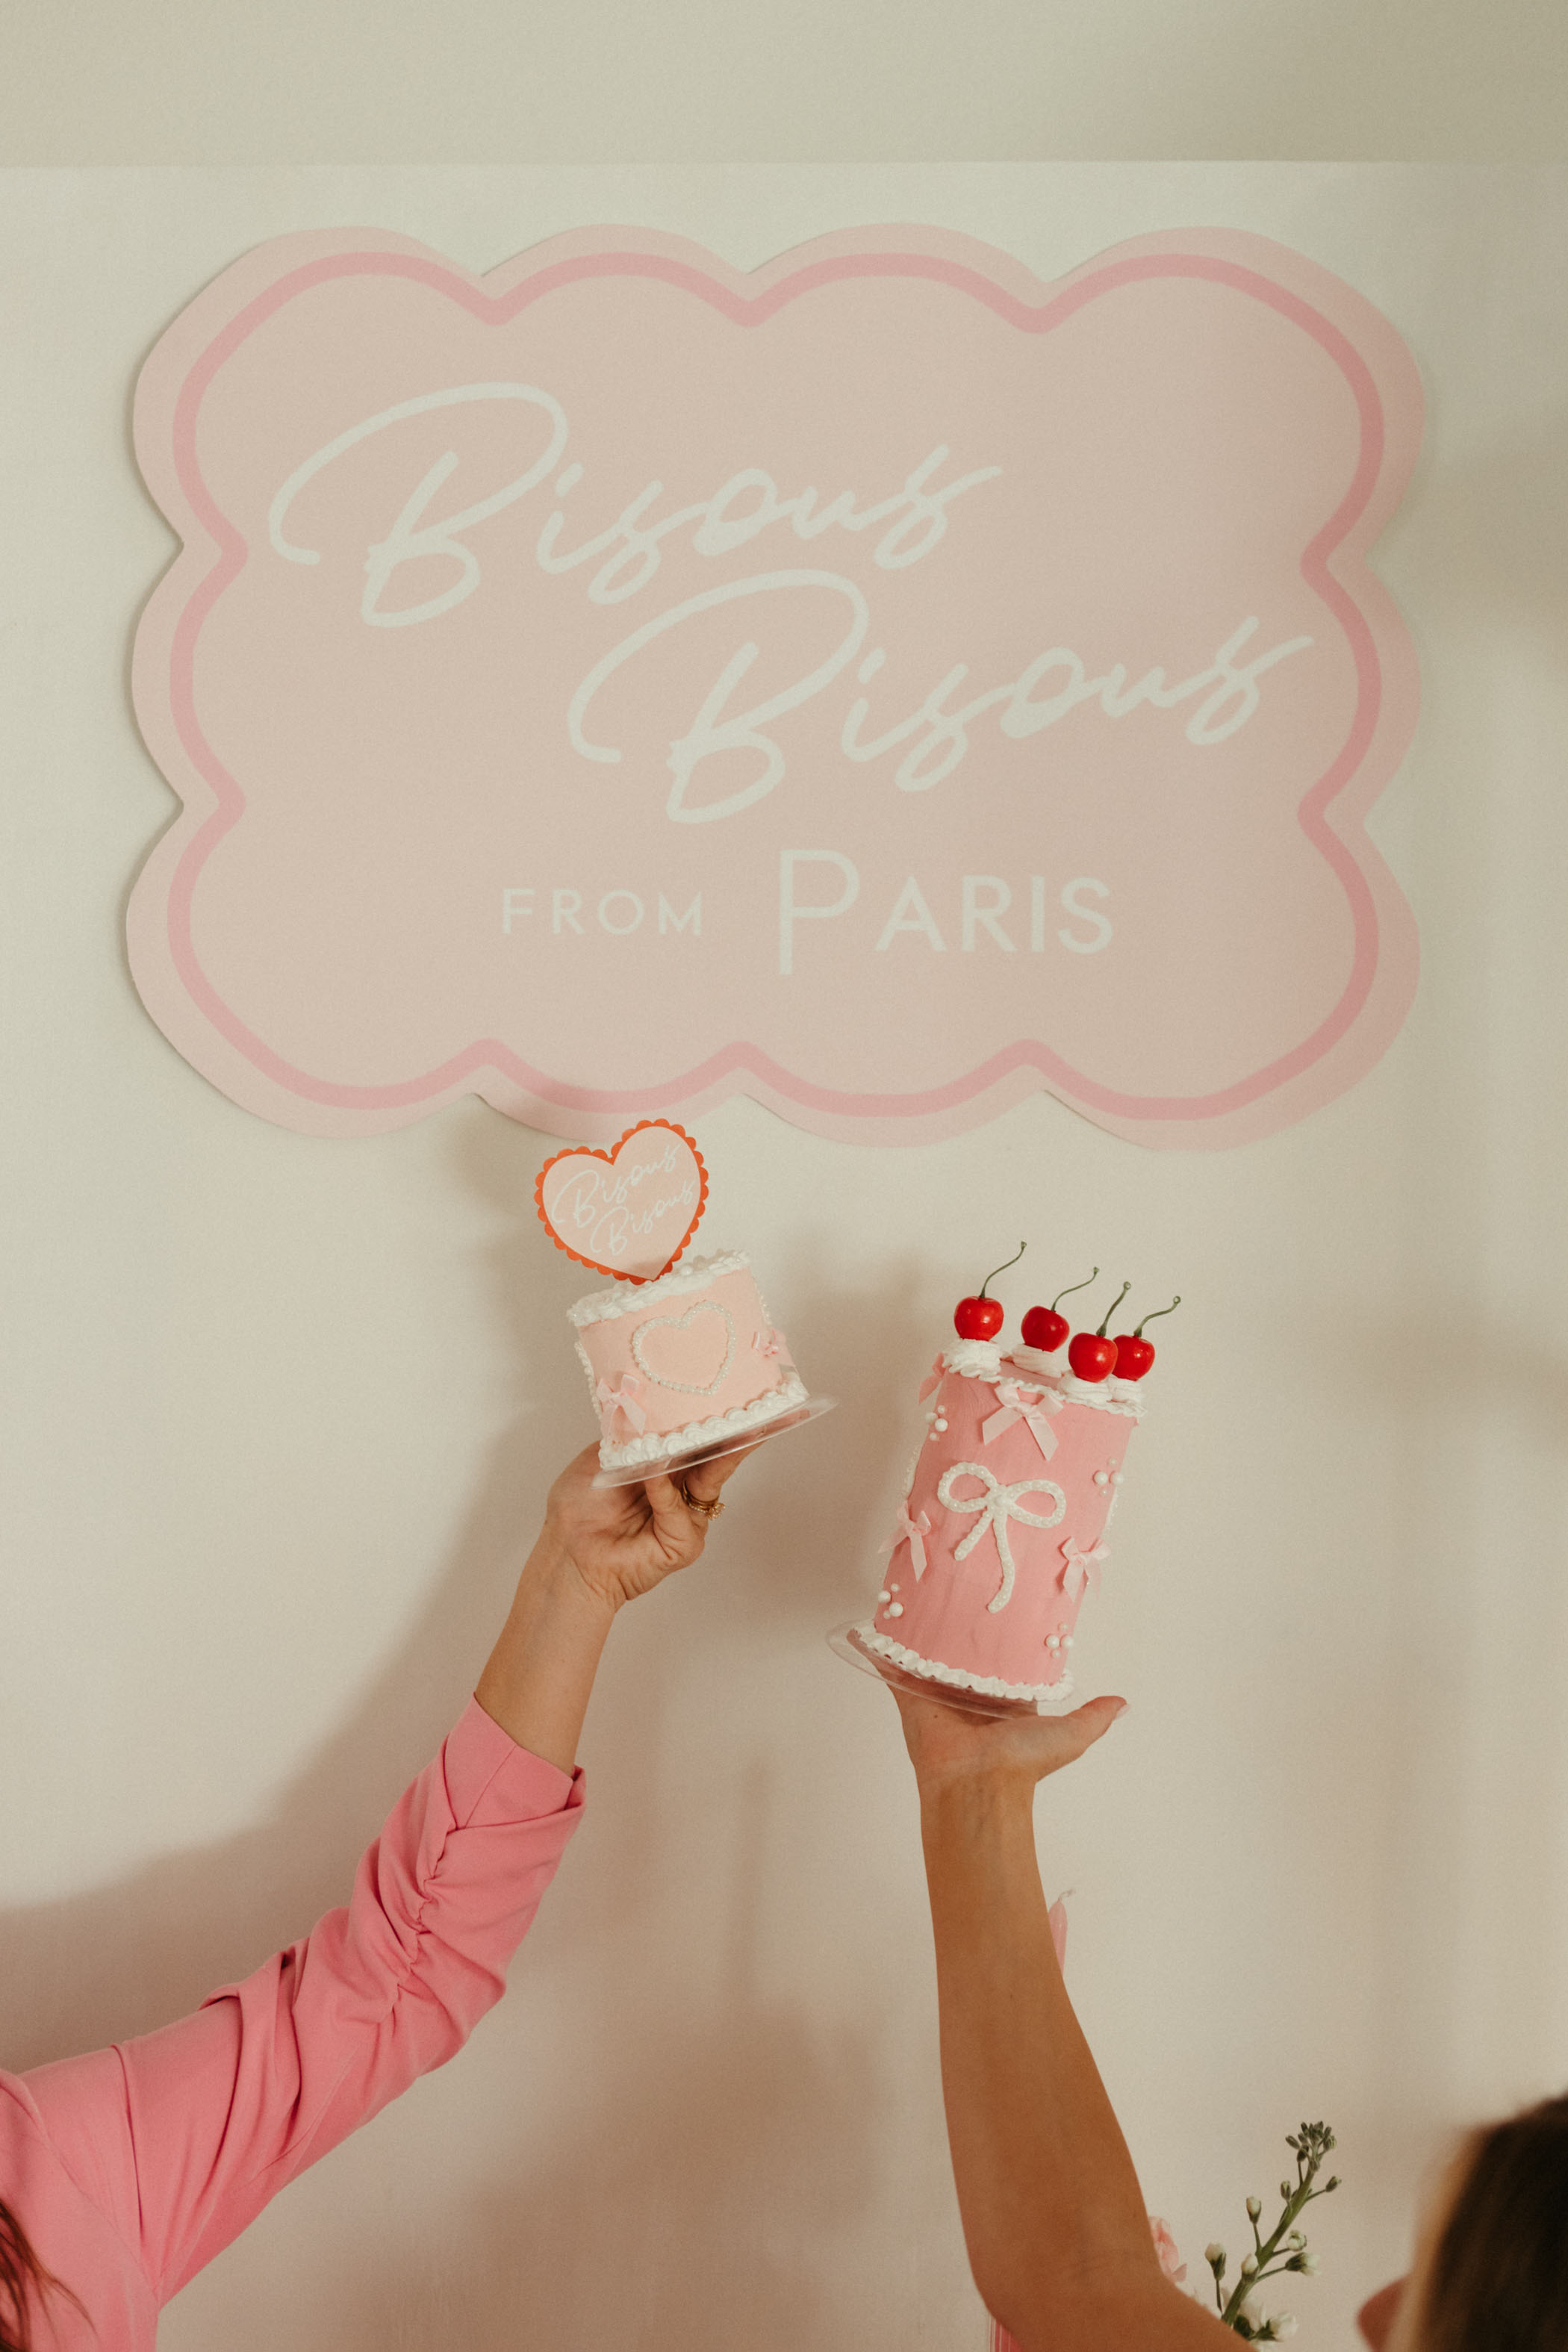 Bisous from Paris Galentines